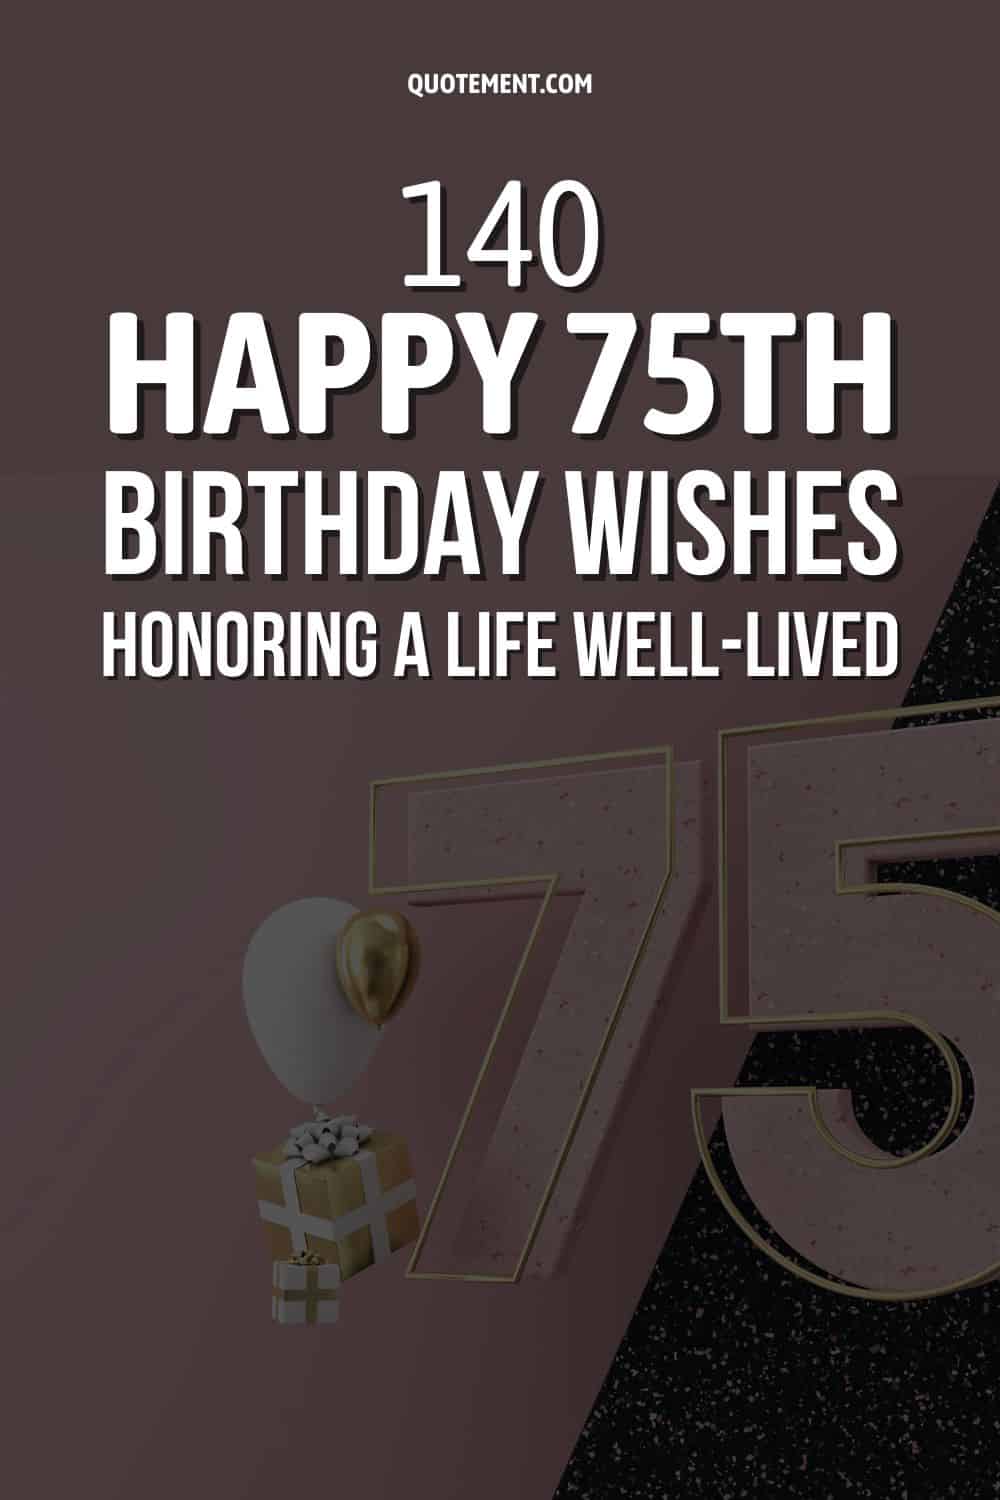 140 Happy 75th Birthday Wishes Honoring A Life Well-Lived
